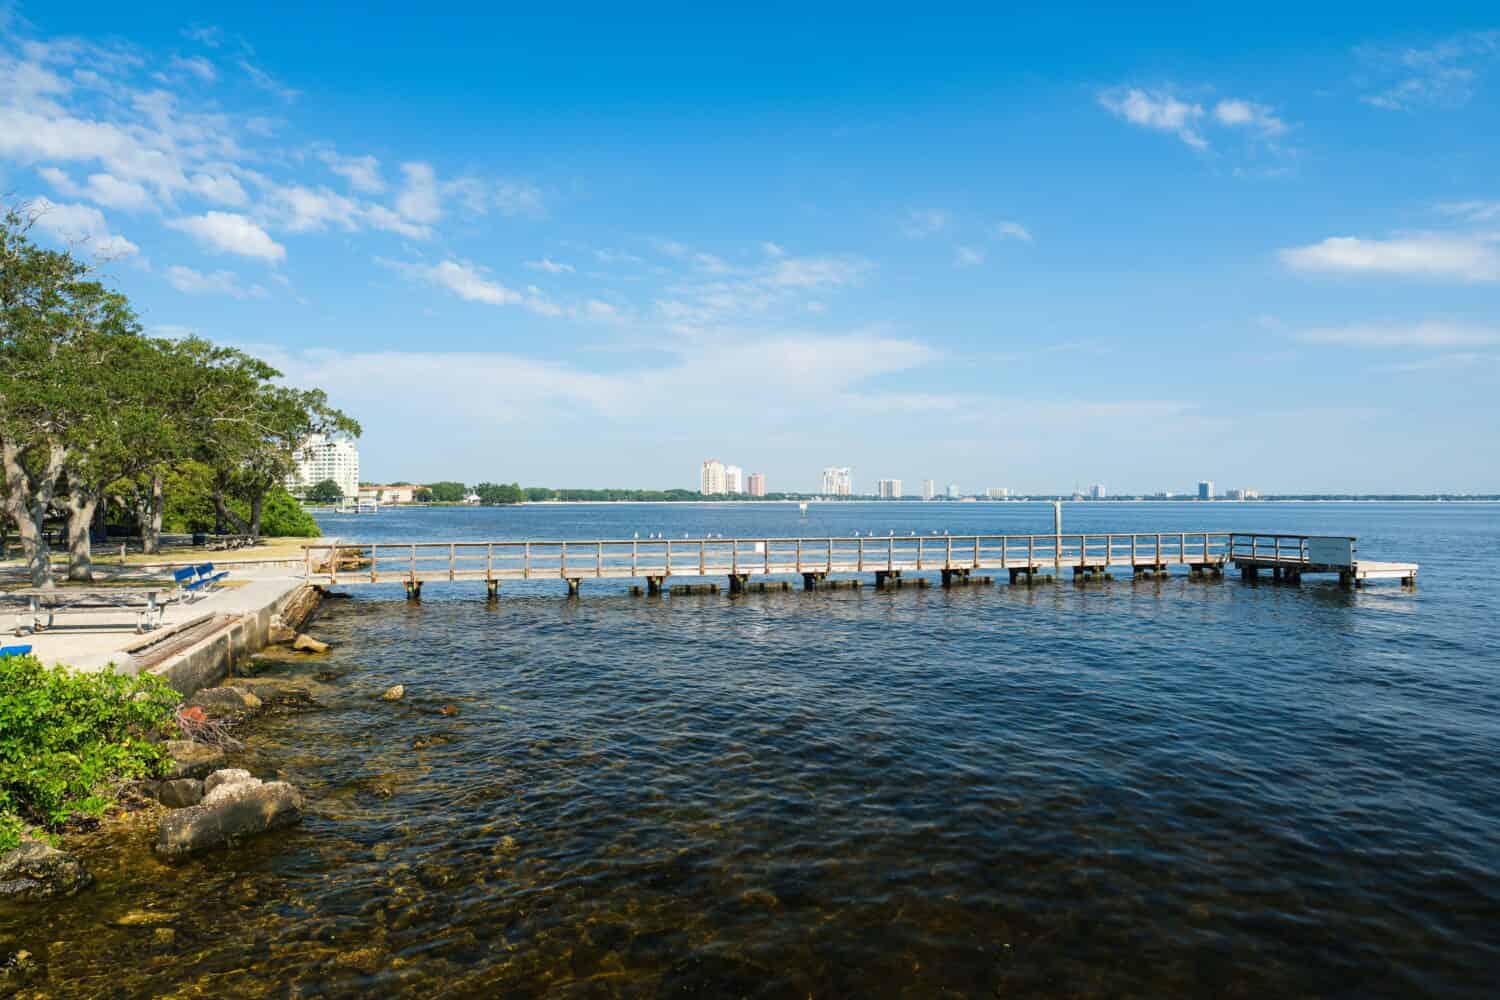 Ballast Point Park overlooking Hillsborough Bay and downtown Tampa, Florida